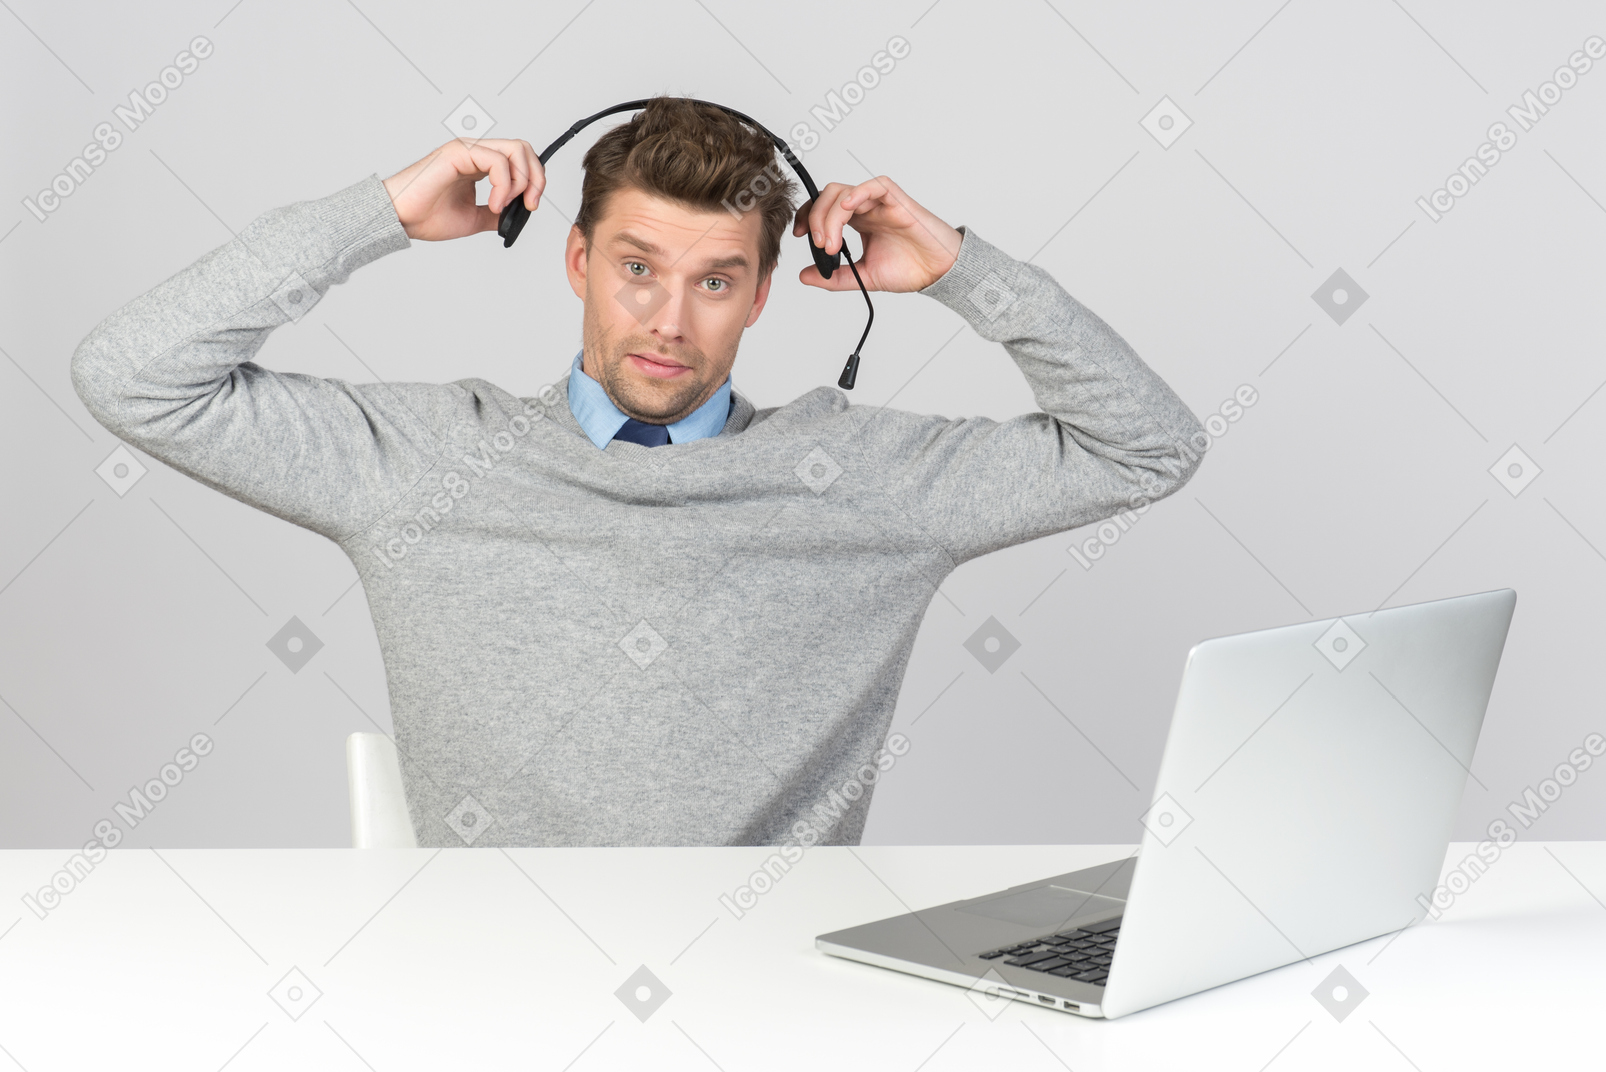 Call center agent pulling off his headset while working on computer